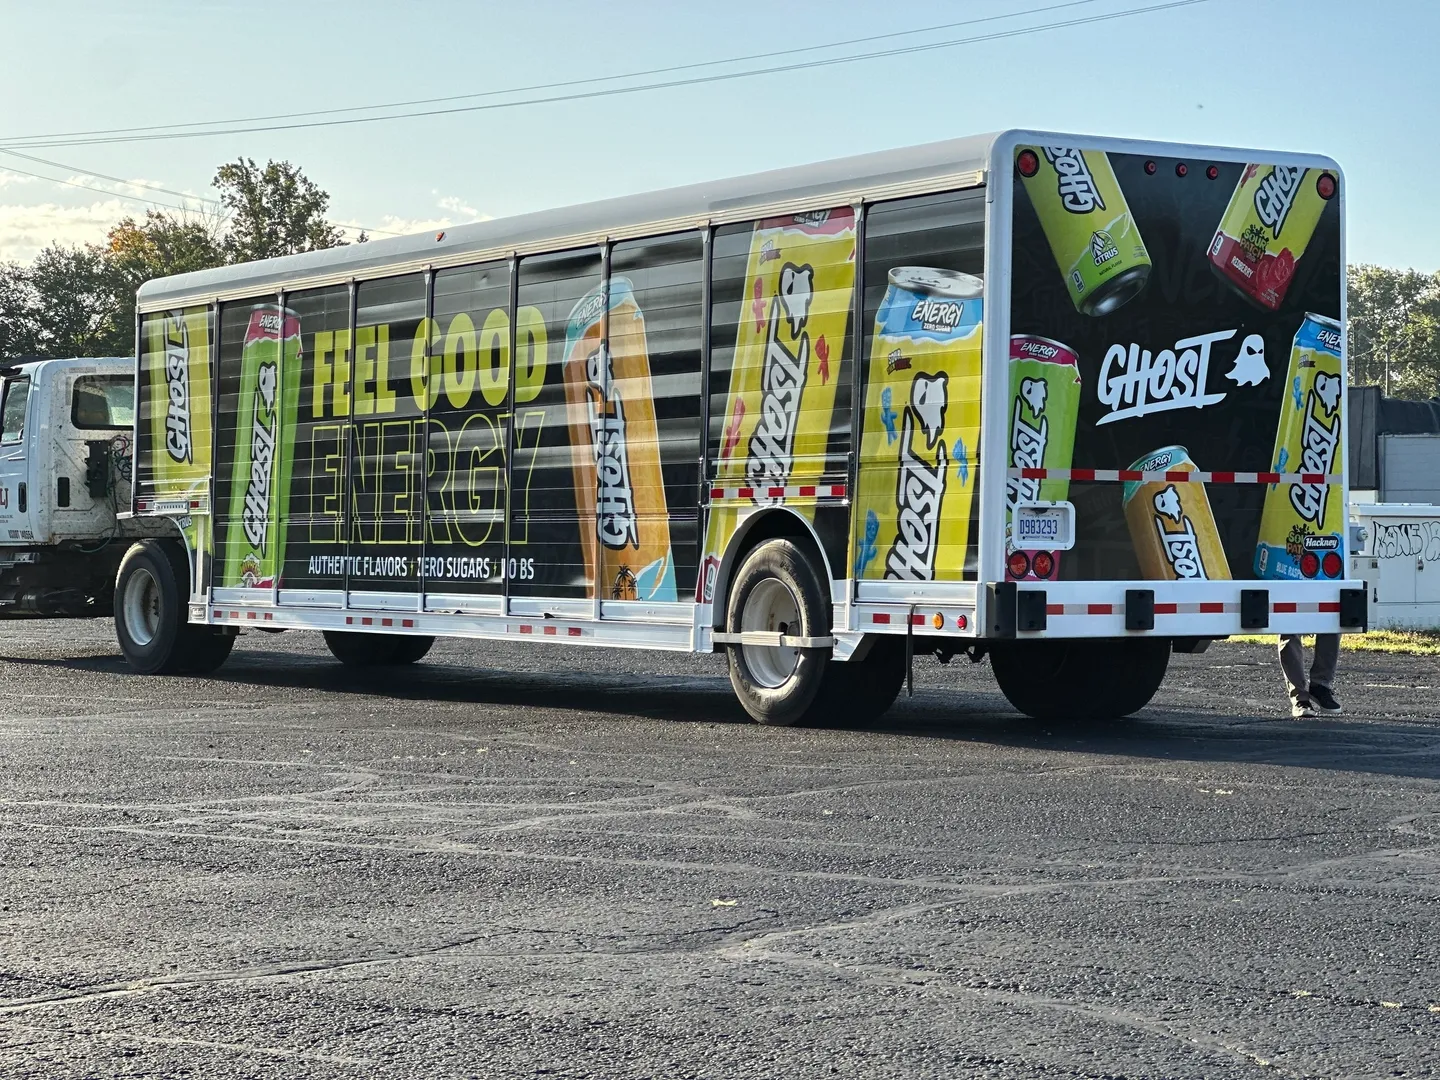 A large bus with advertisements on the side of it.